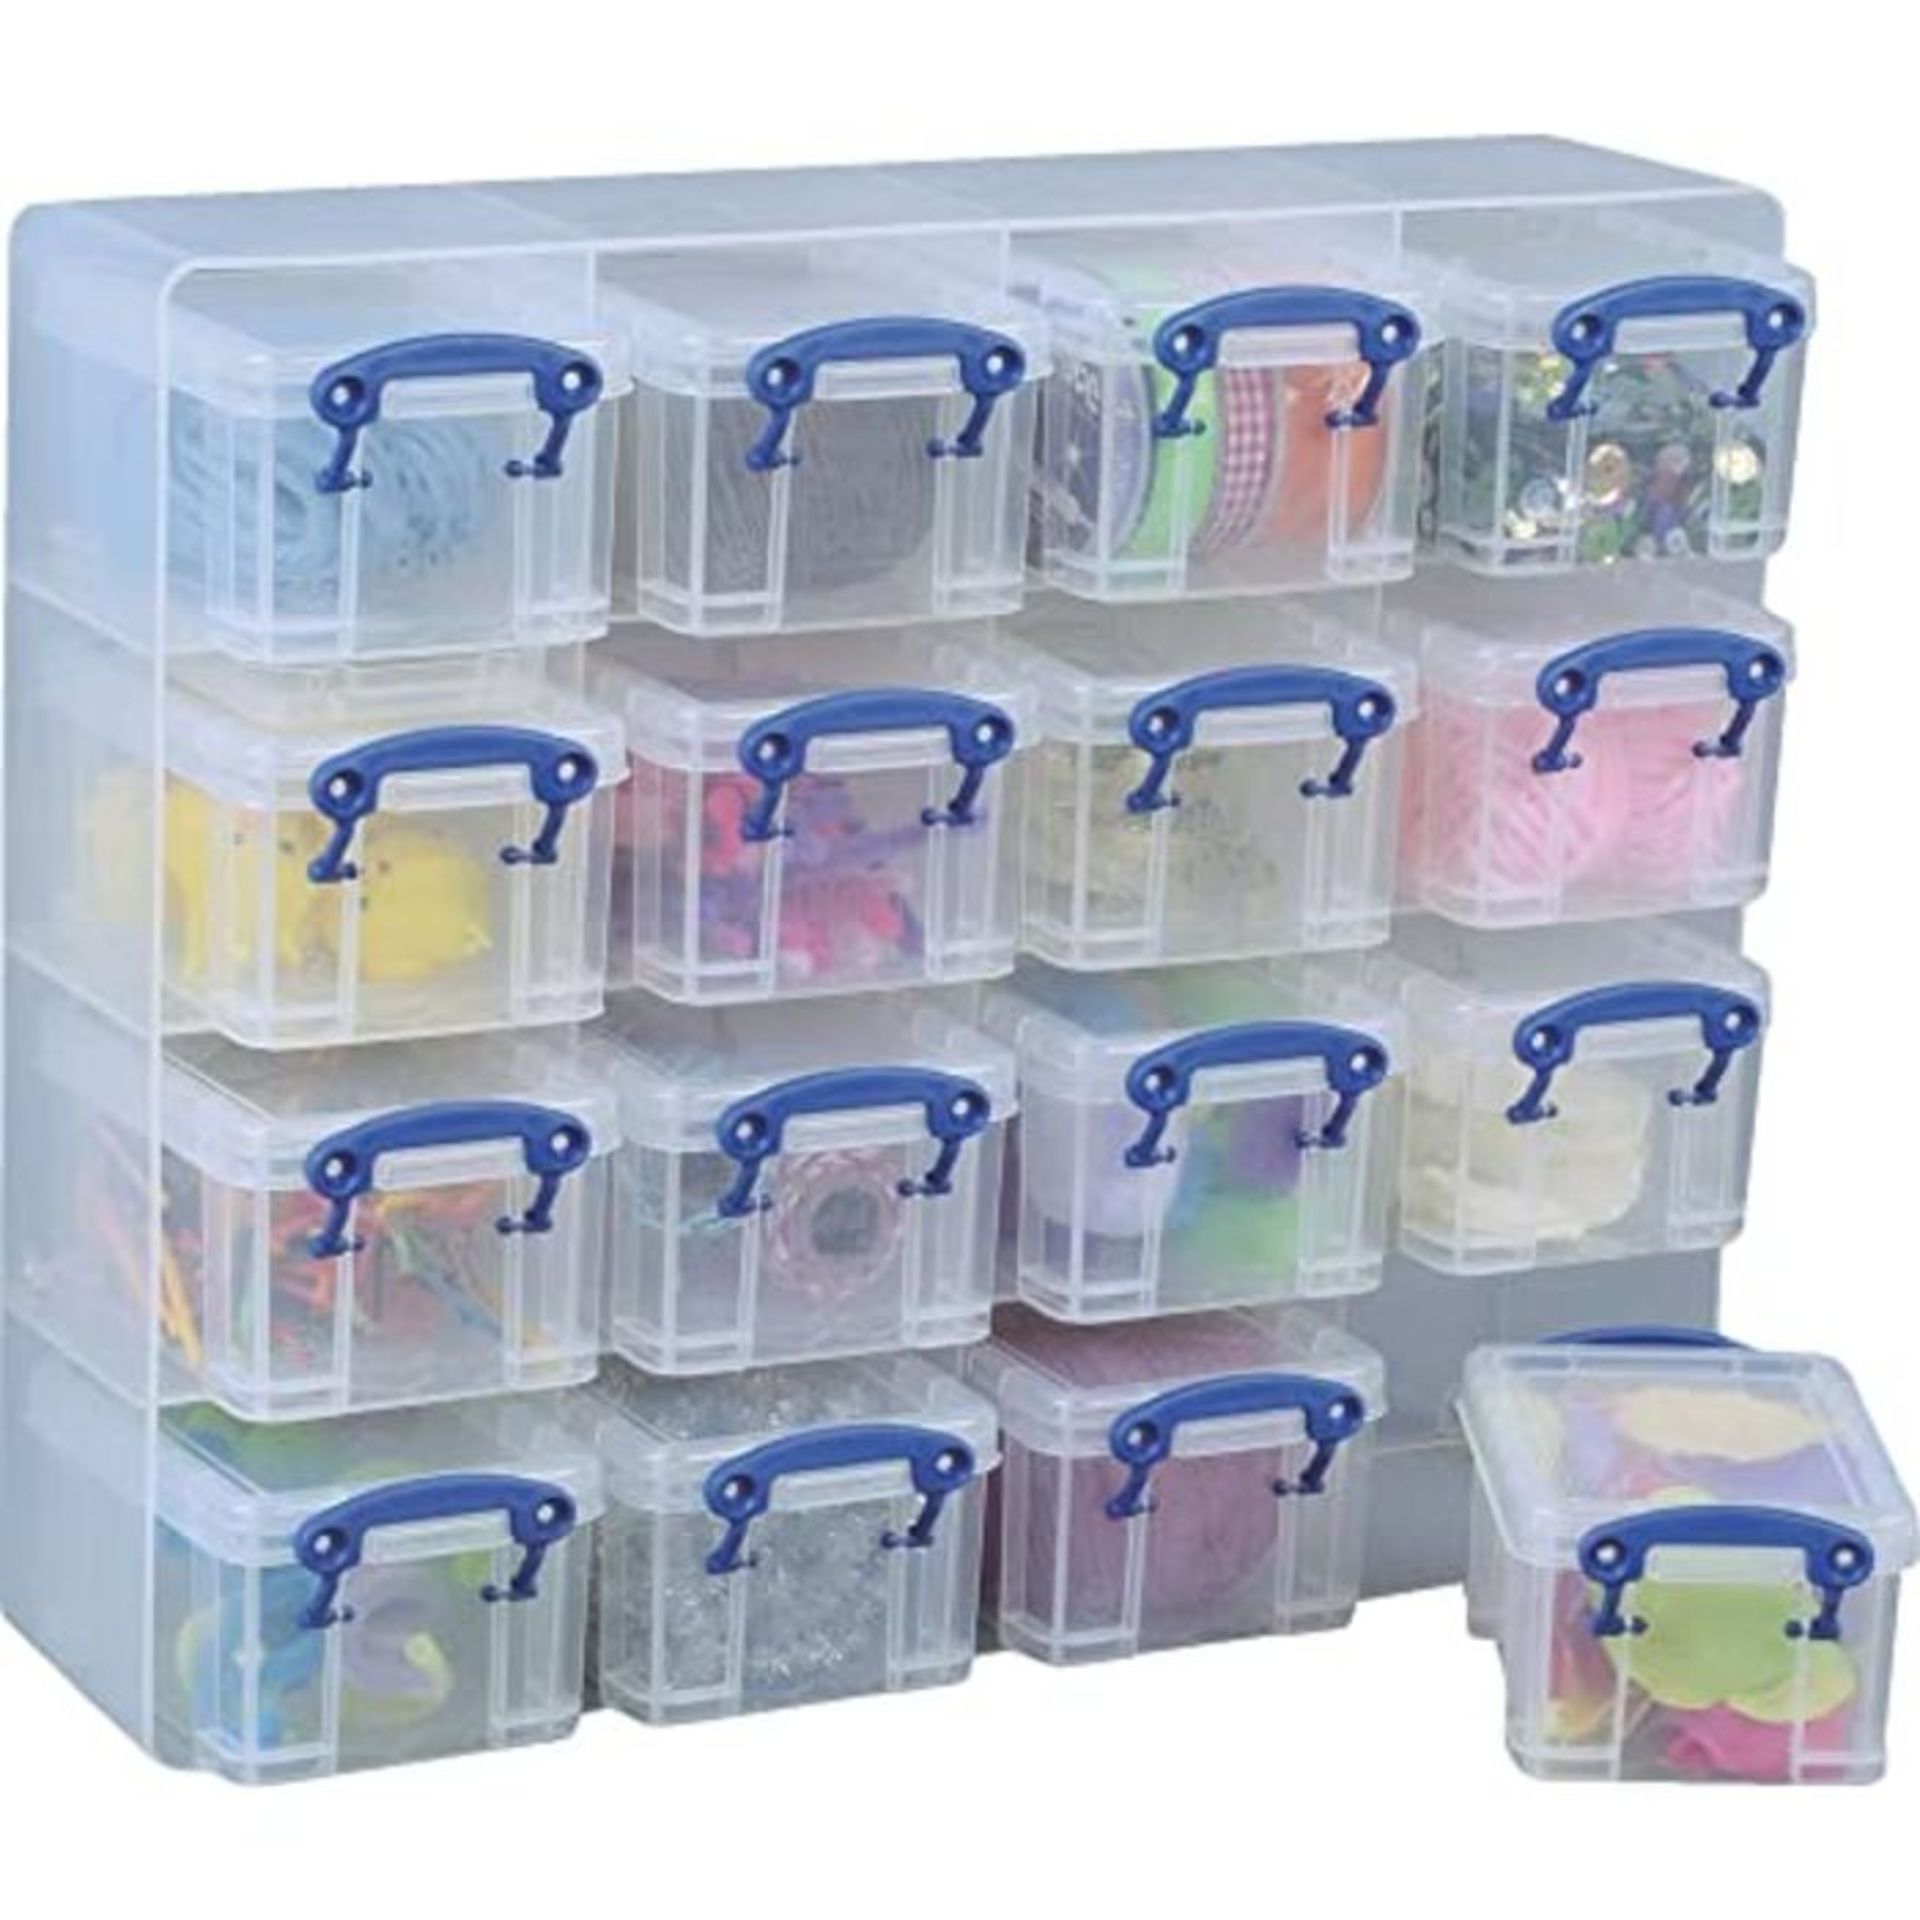 COMBINED RRP £234.00 LOT TO CONTAIN 38 ASSORTED Office Products: Elba,, Black, Obling, Xerox, C - Image 24 of 29